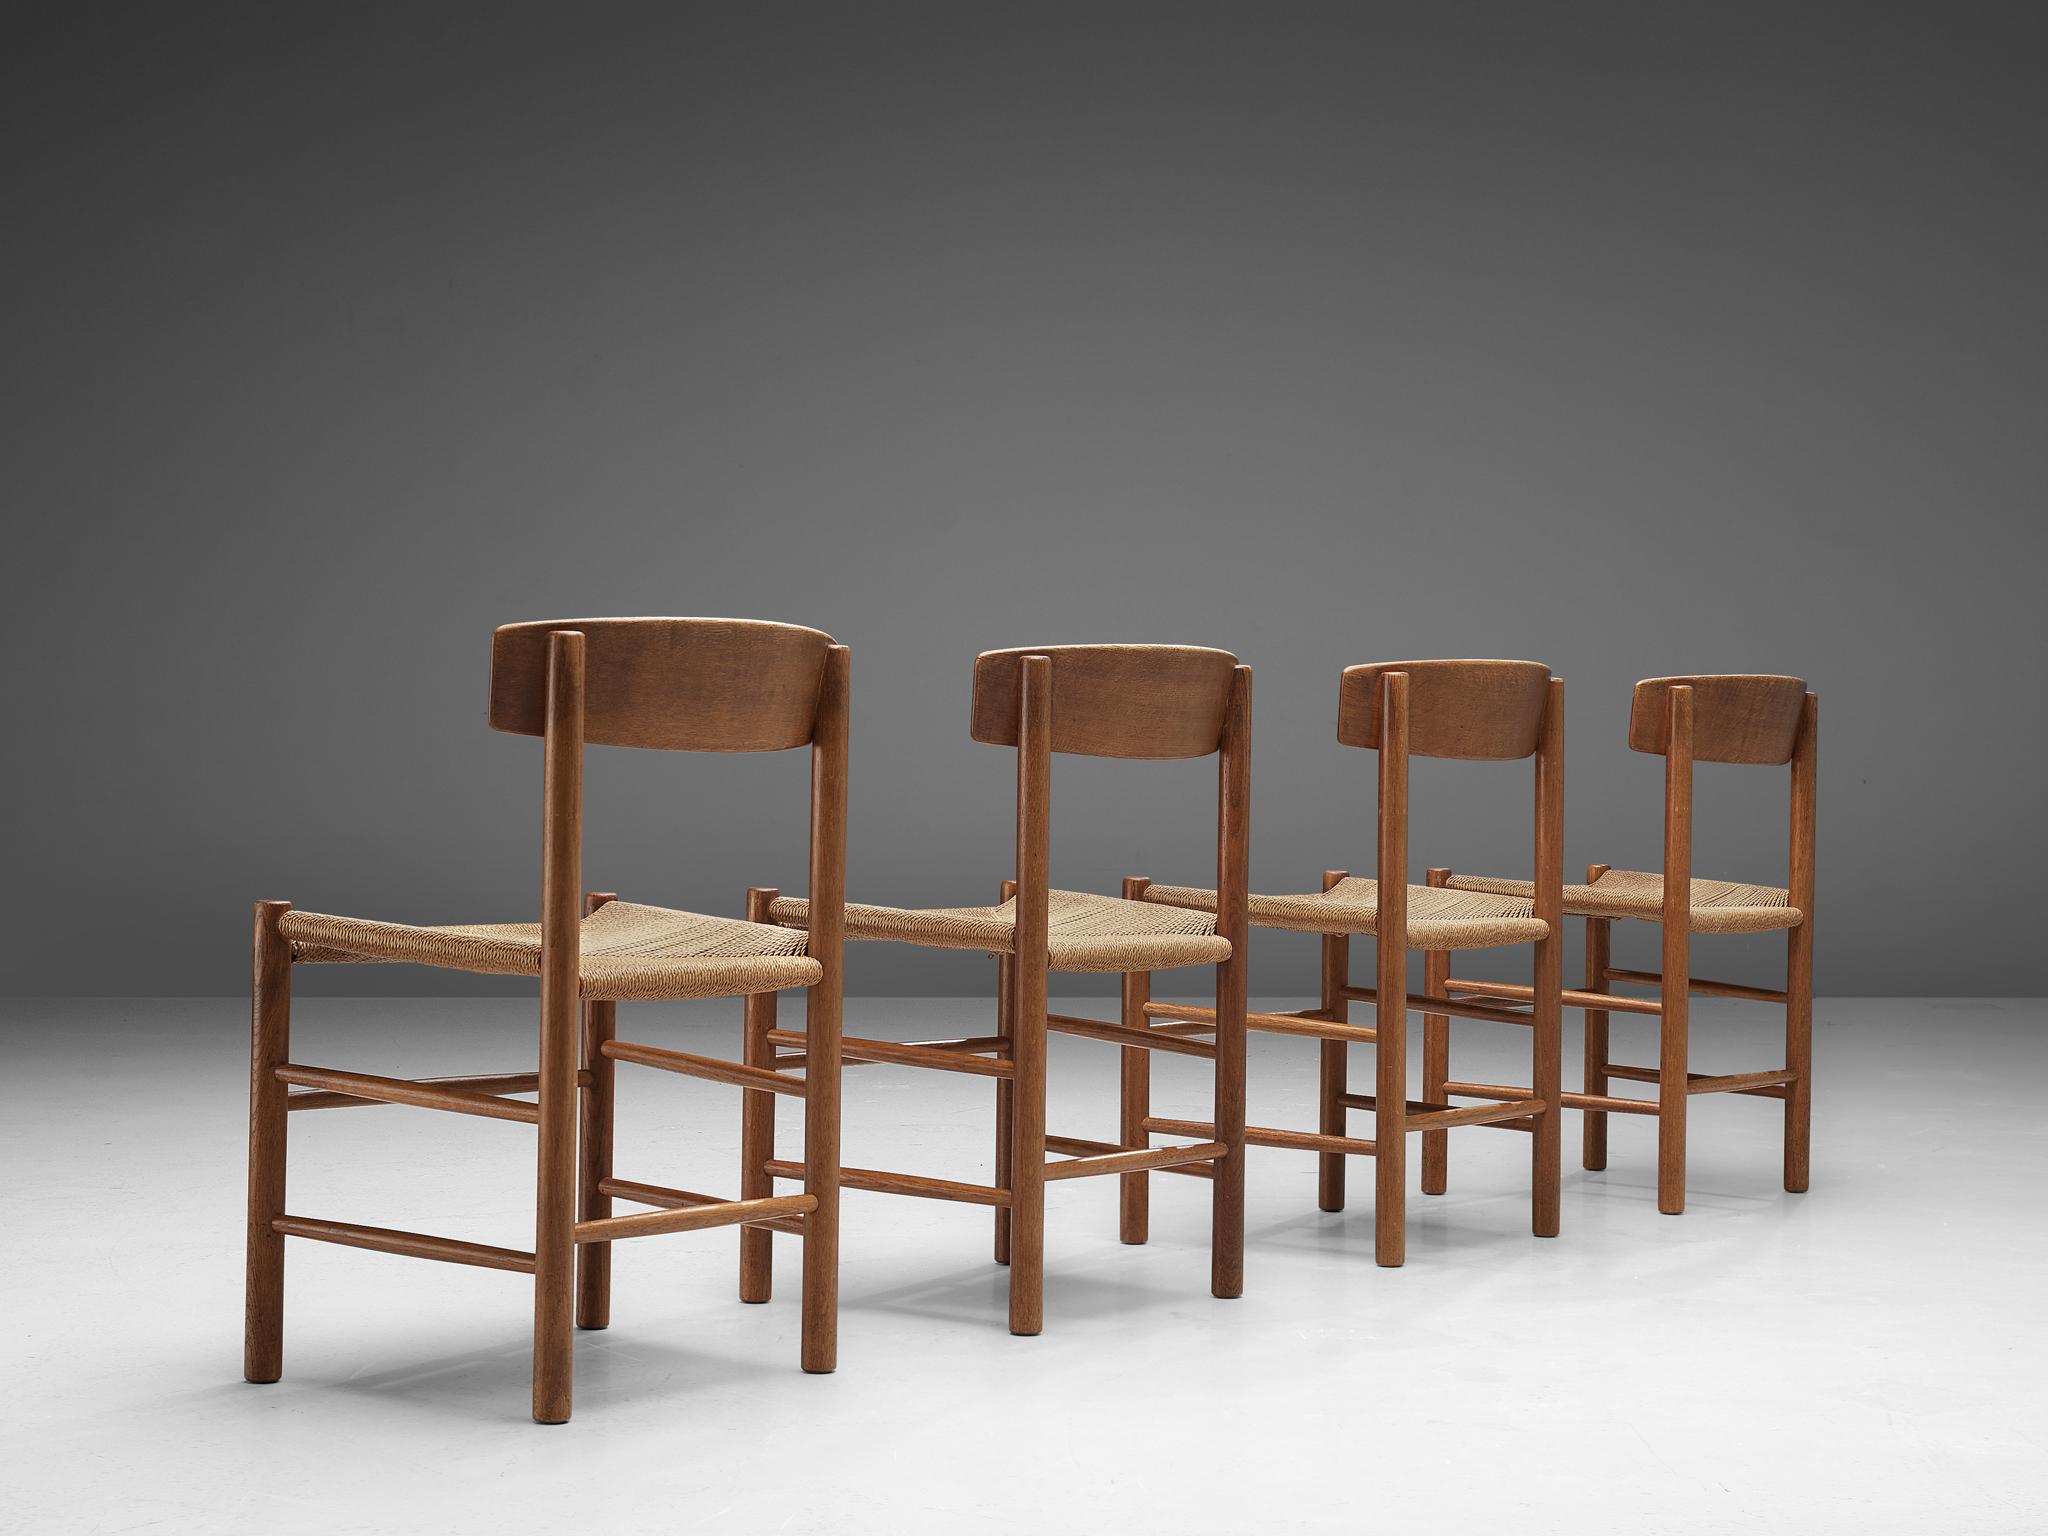 Børge Mogensen for FDB Møbler, set of four dining chairs model 'J39', oak, paper cord, Denmark, design 1947.

The design of Børge Mogensen's J39 design is in many ways aesthetically pleasing. Not only provides the handwoven paper cord a great